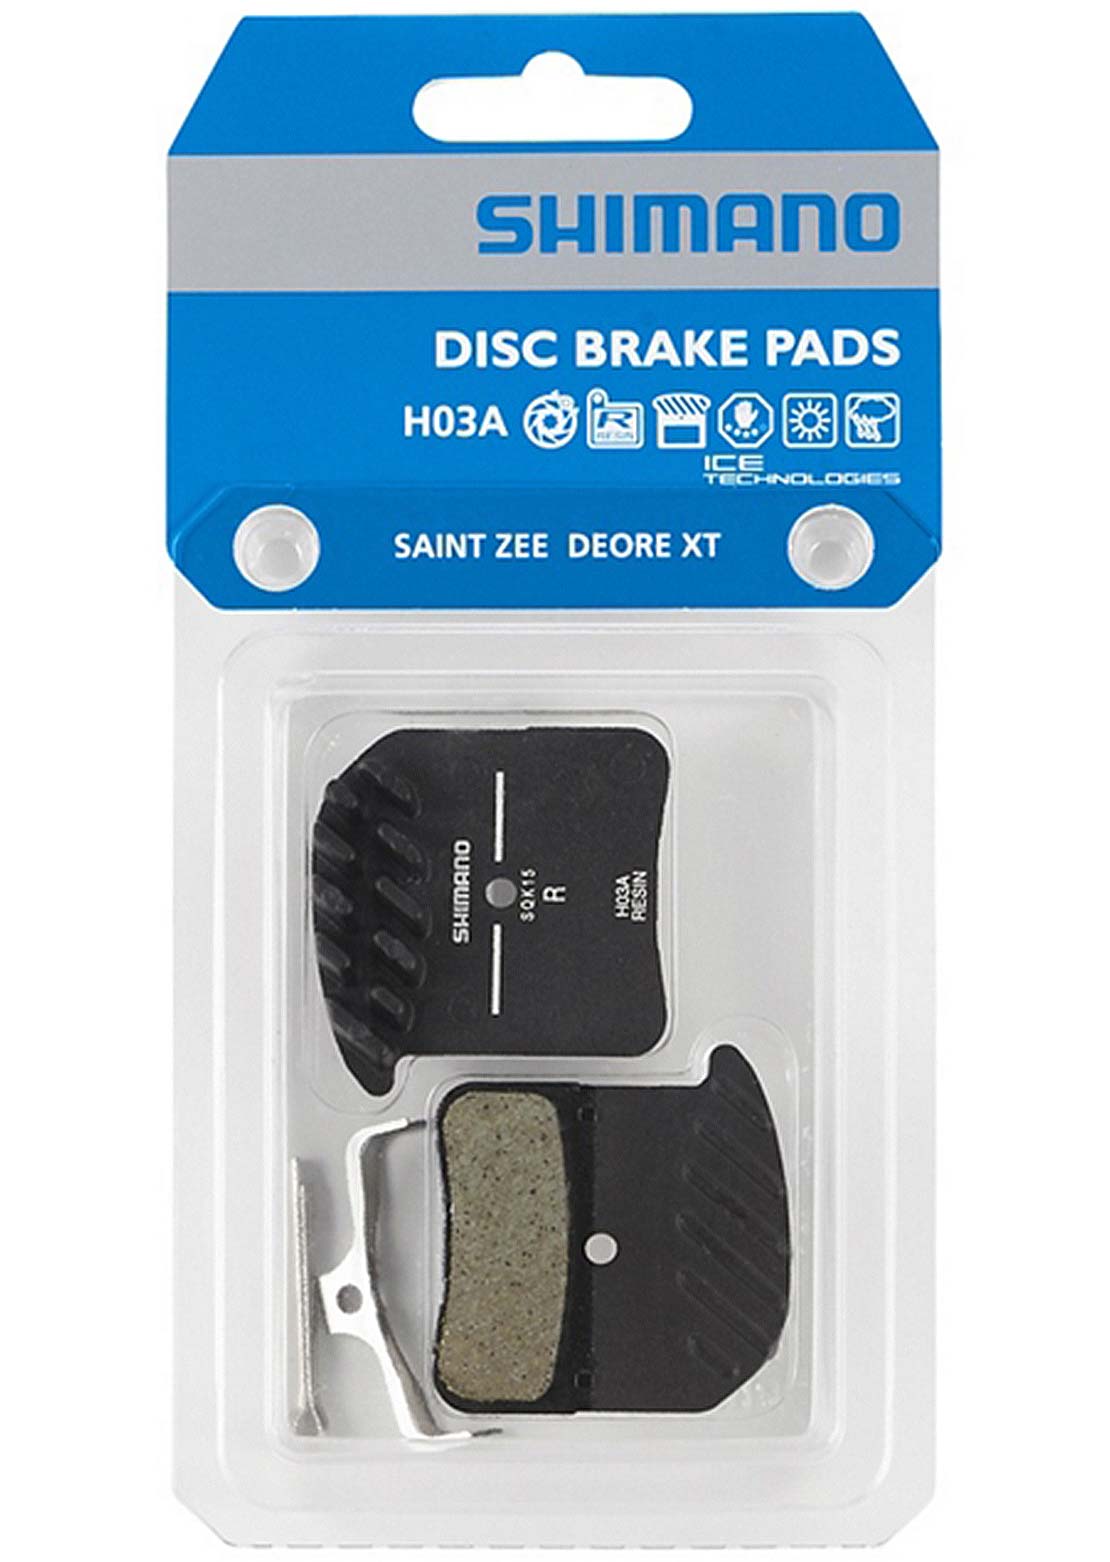 Shimano H03A Resin Disk Brake Pad with Fin &amp; Spring